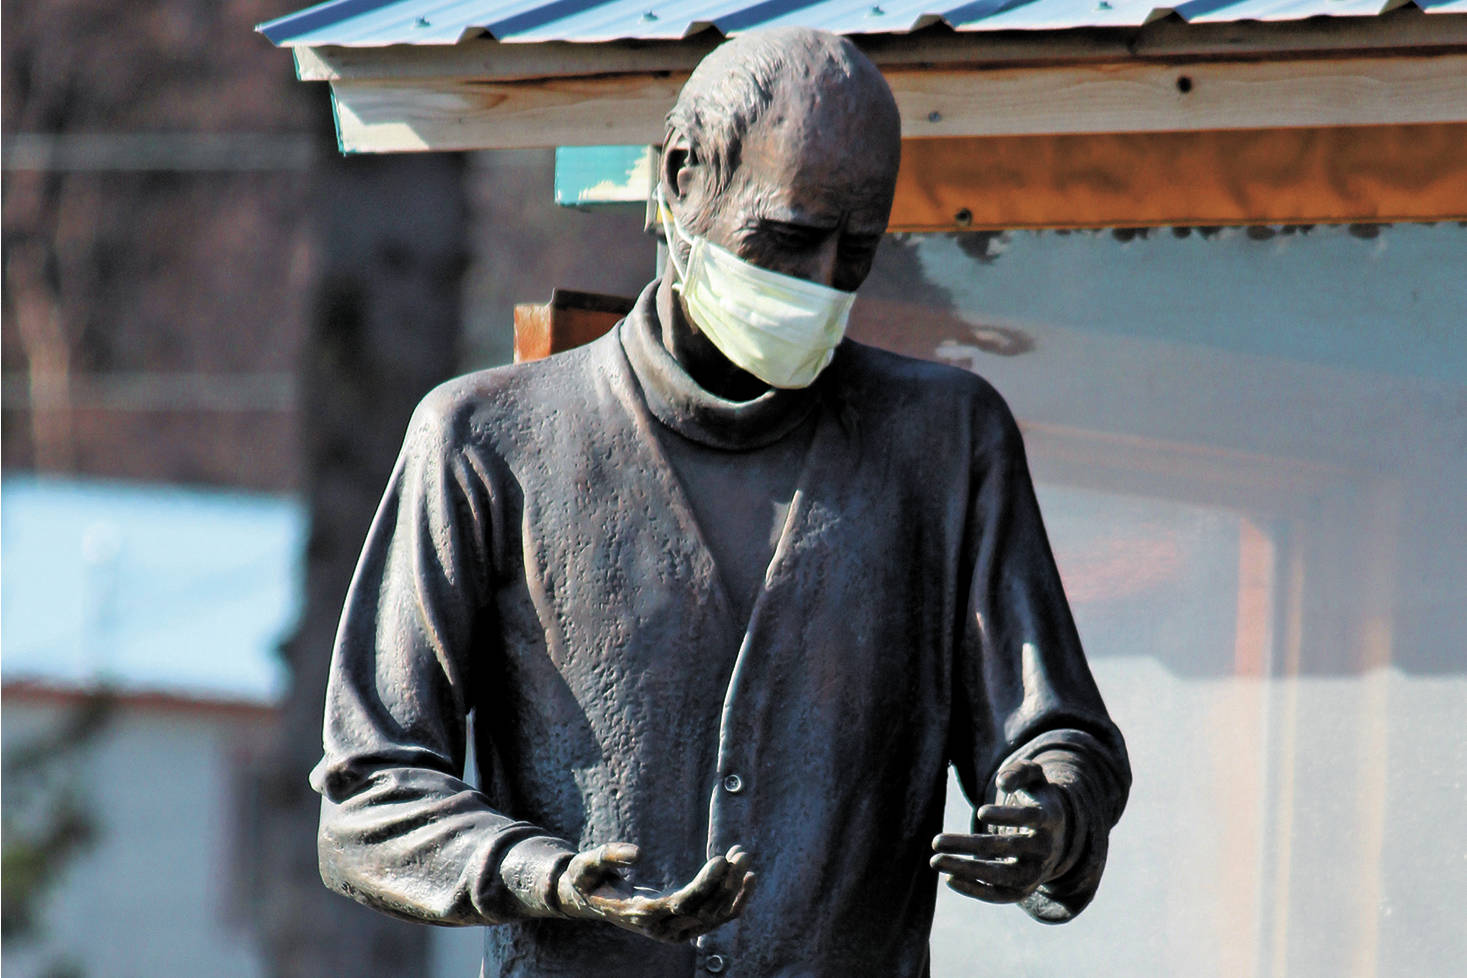 The statue of Brother Asaiah Bates that stands at Cosmic Kitchen is seen wearing a mask on Monday, April 6, 2020 in Homer, Alaska. The state of Alaska is currently advising people to wear protective cloth coverings when they have to go out in public for essentials. (Photo by Megan Pacer/Homer News)